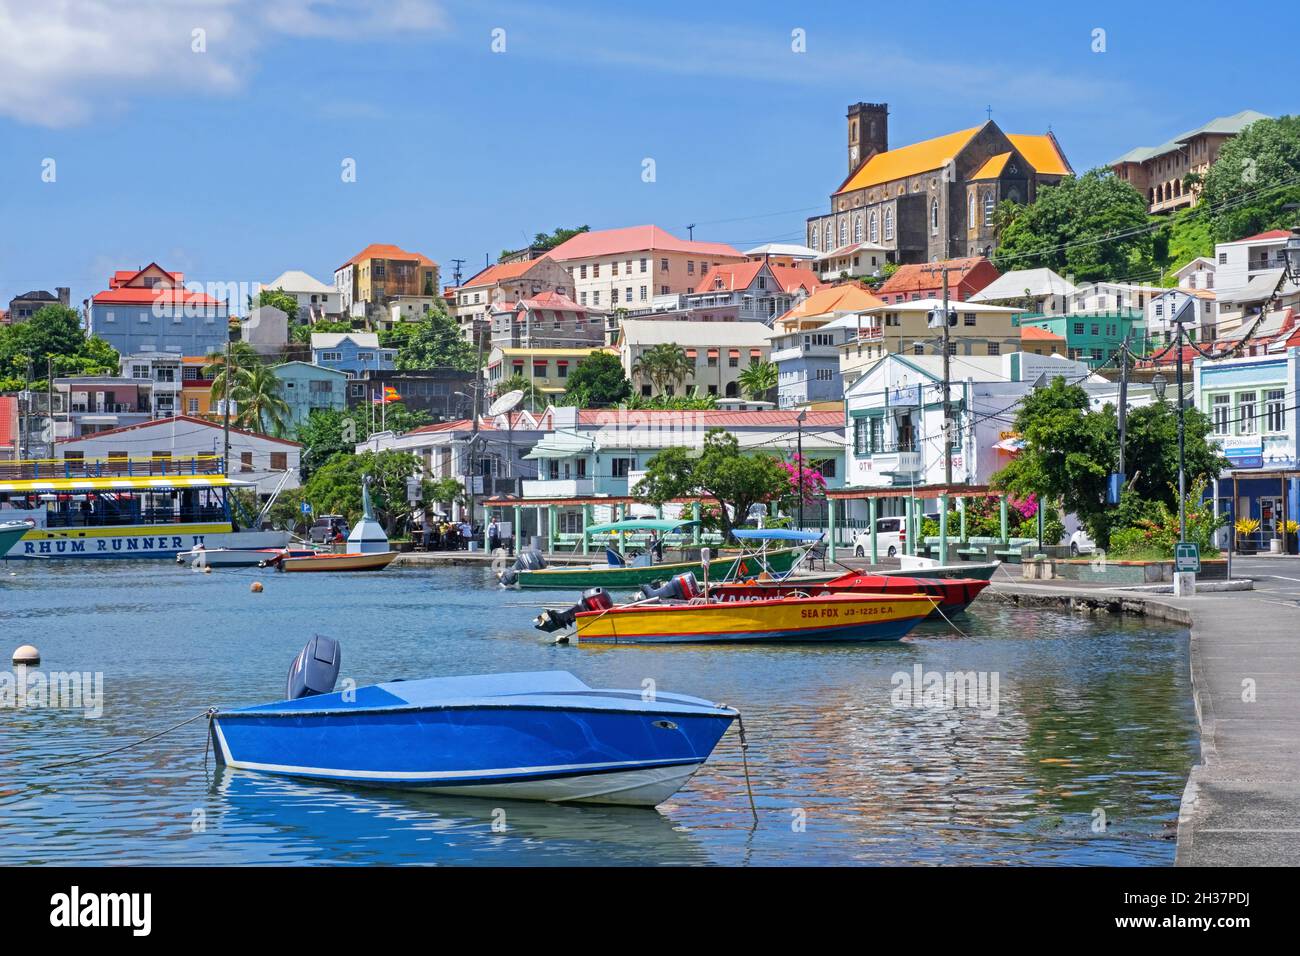 Waterfront and Roman Catholic Cathedral of the capital city St. George's on the west coast of the island of Grenada in the Caribbean Sea Stock Photo